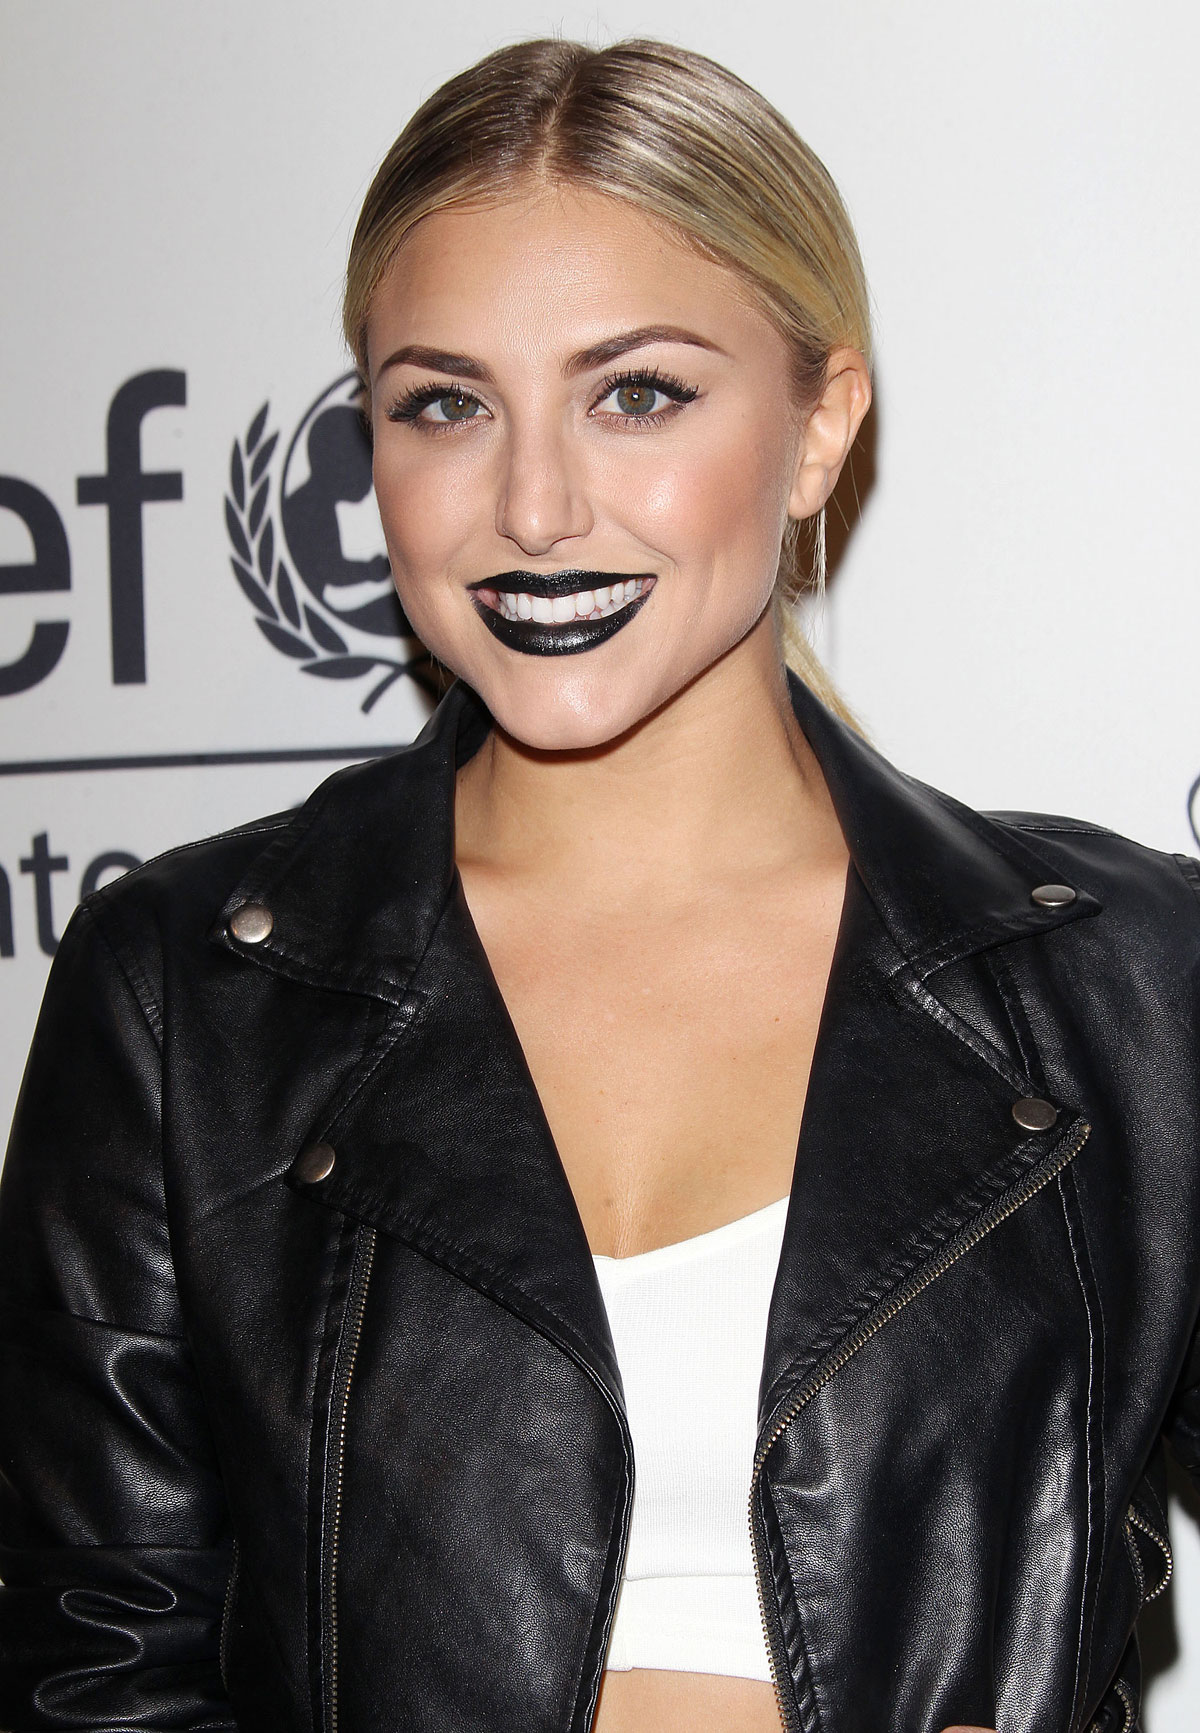 Cassie Scerbo set UNICEF’s Next Generation’s 2nd Annual UNICEF Masquerade Ball